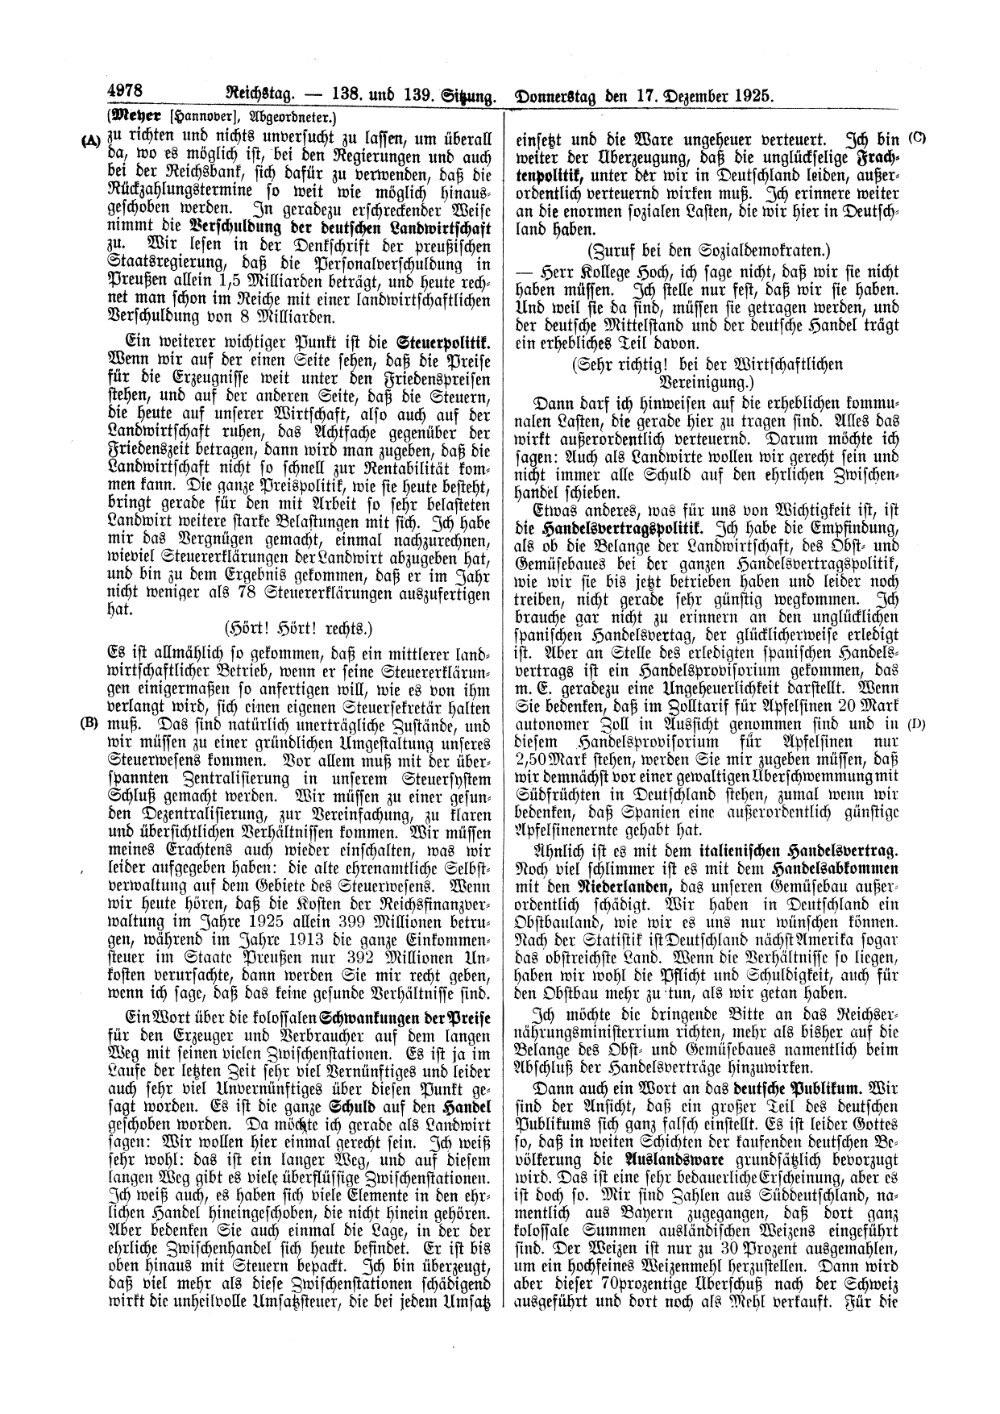 Scan of page 4978